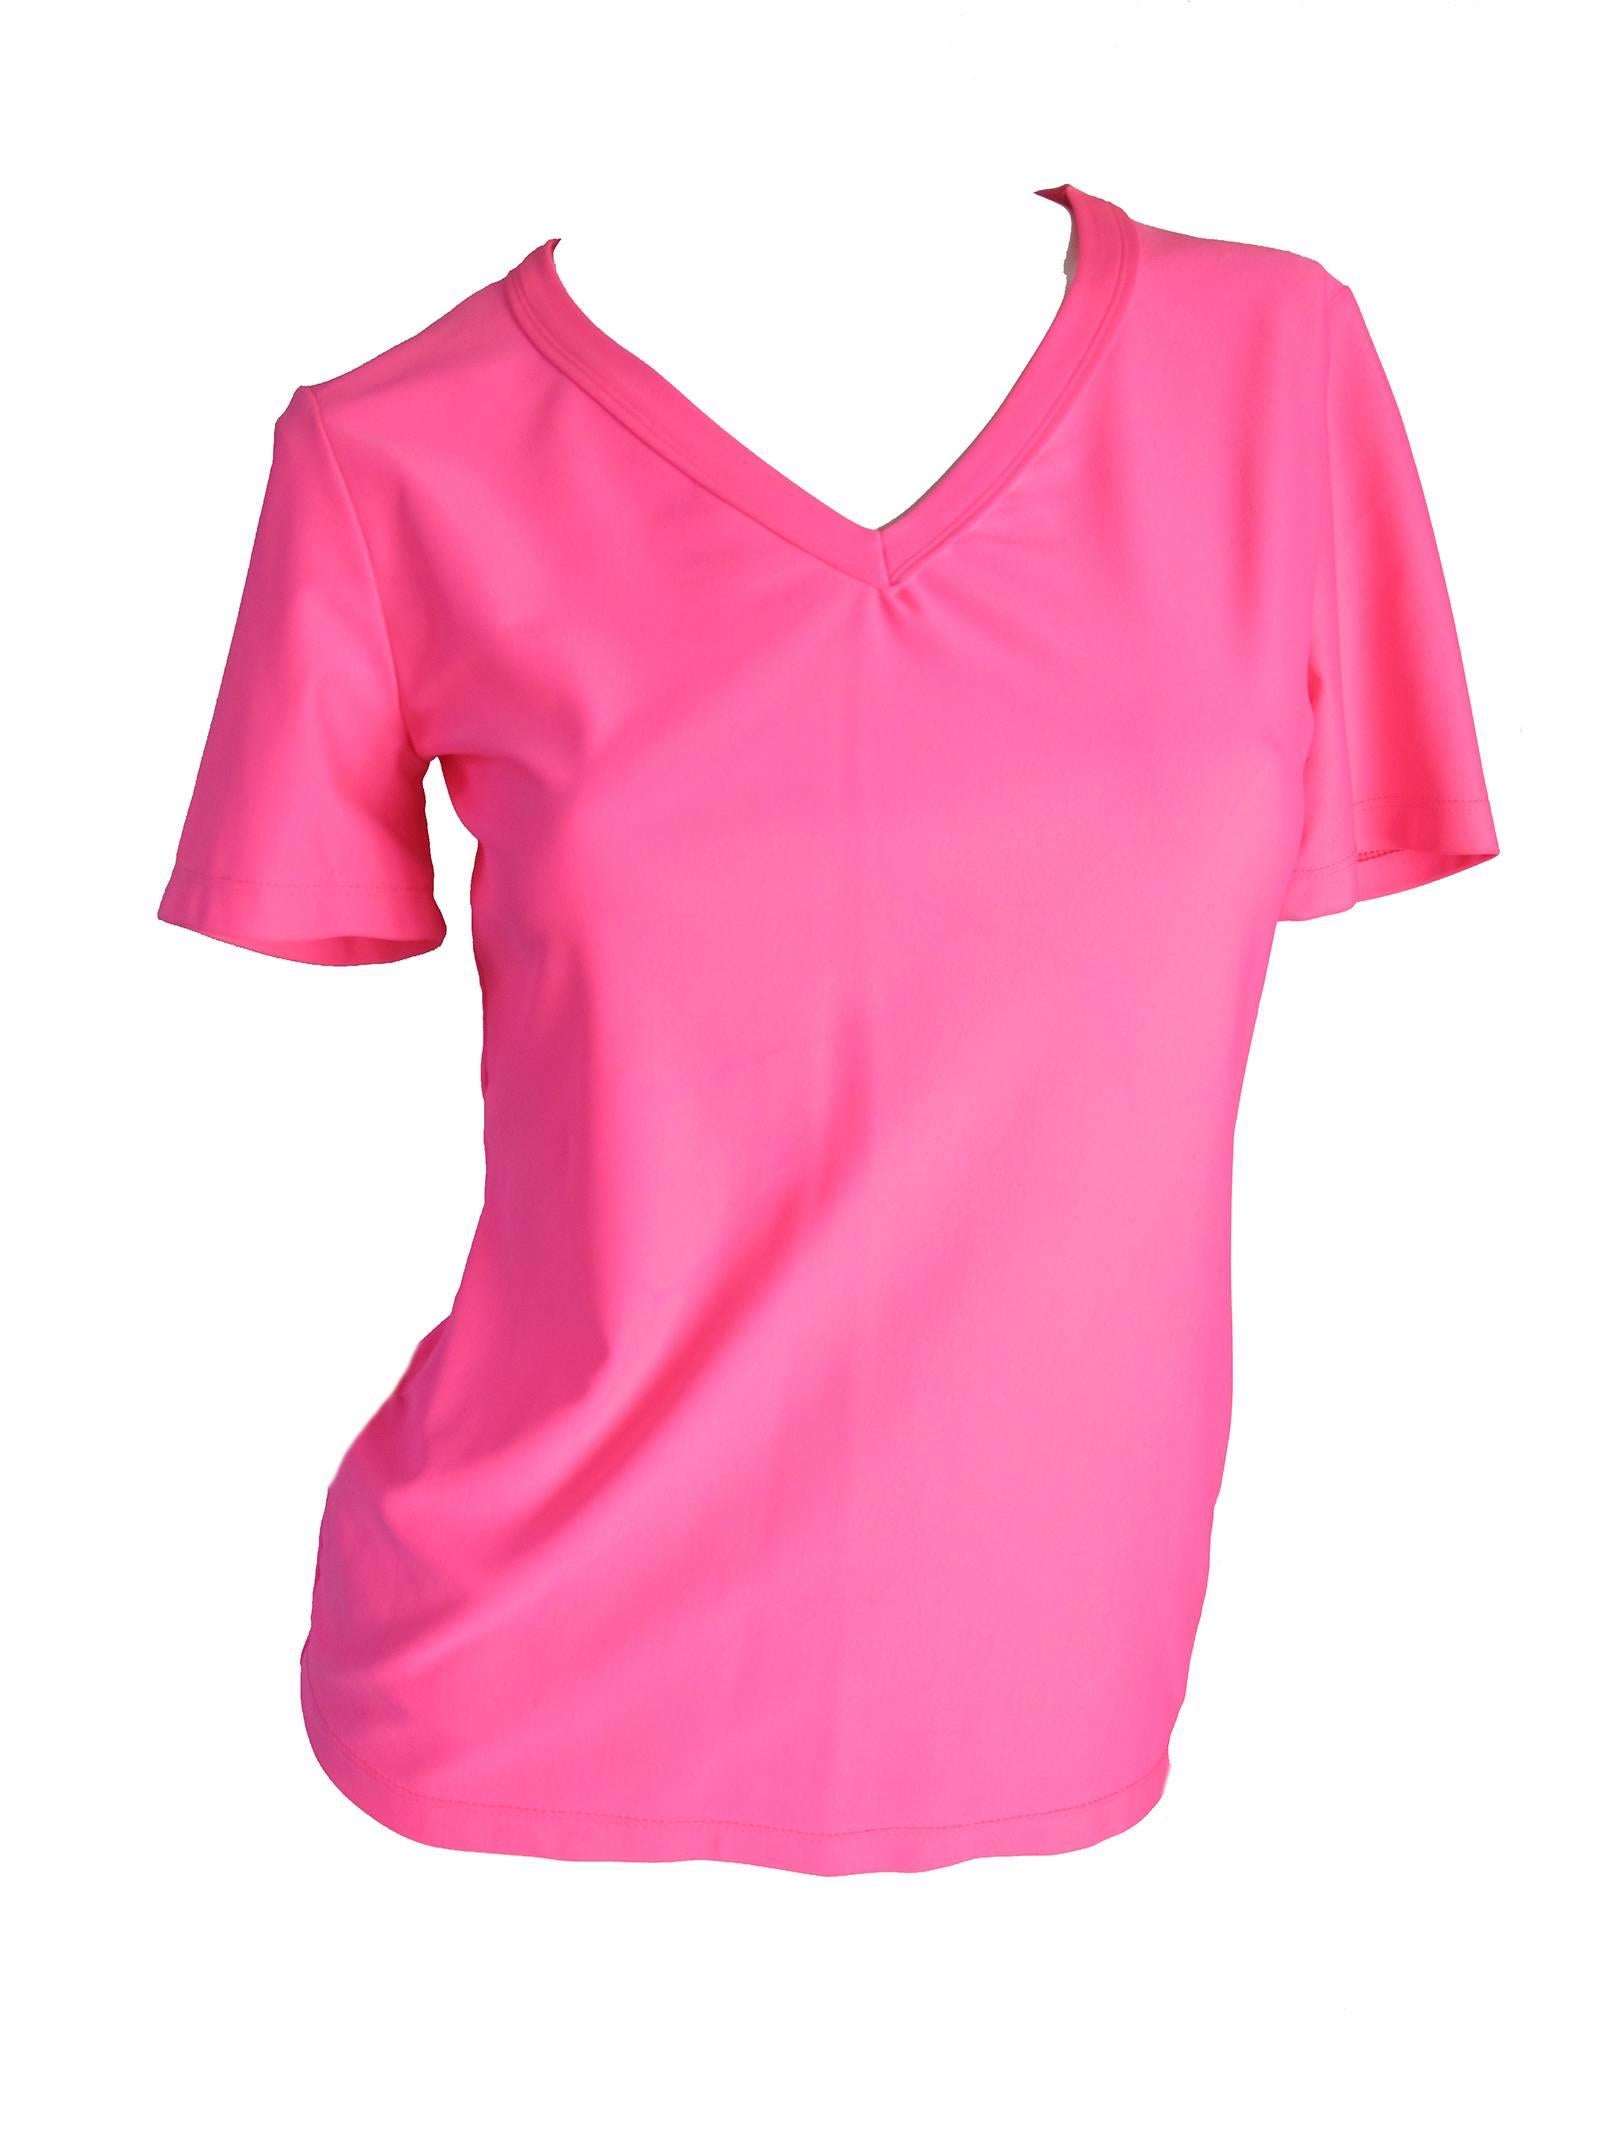 Versus neon pink tee with letters on back.  Condition: Good, some discoloration.  Nylon/spandex material.  Medium ( mannequin is a US size 6)
We accept returns for refund, please see our terms.  We offer free ground shipping within the US. 